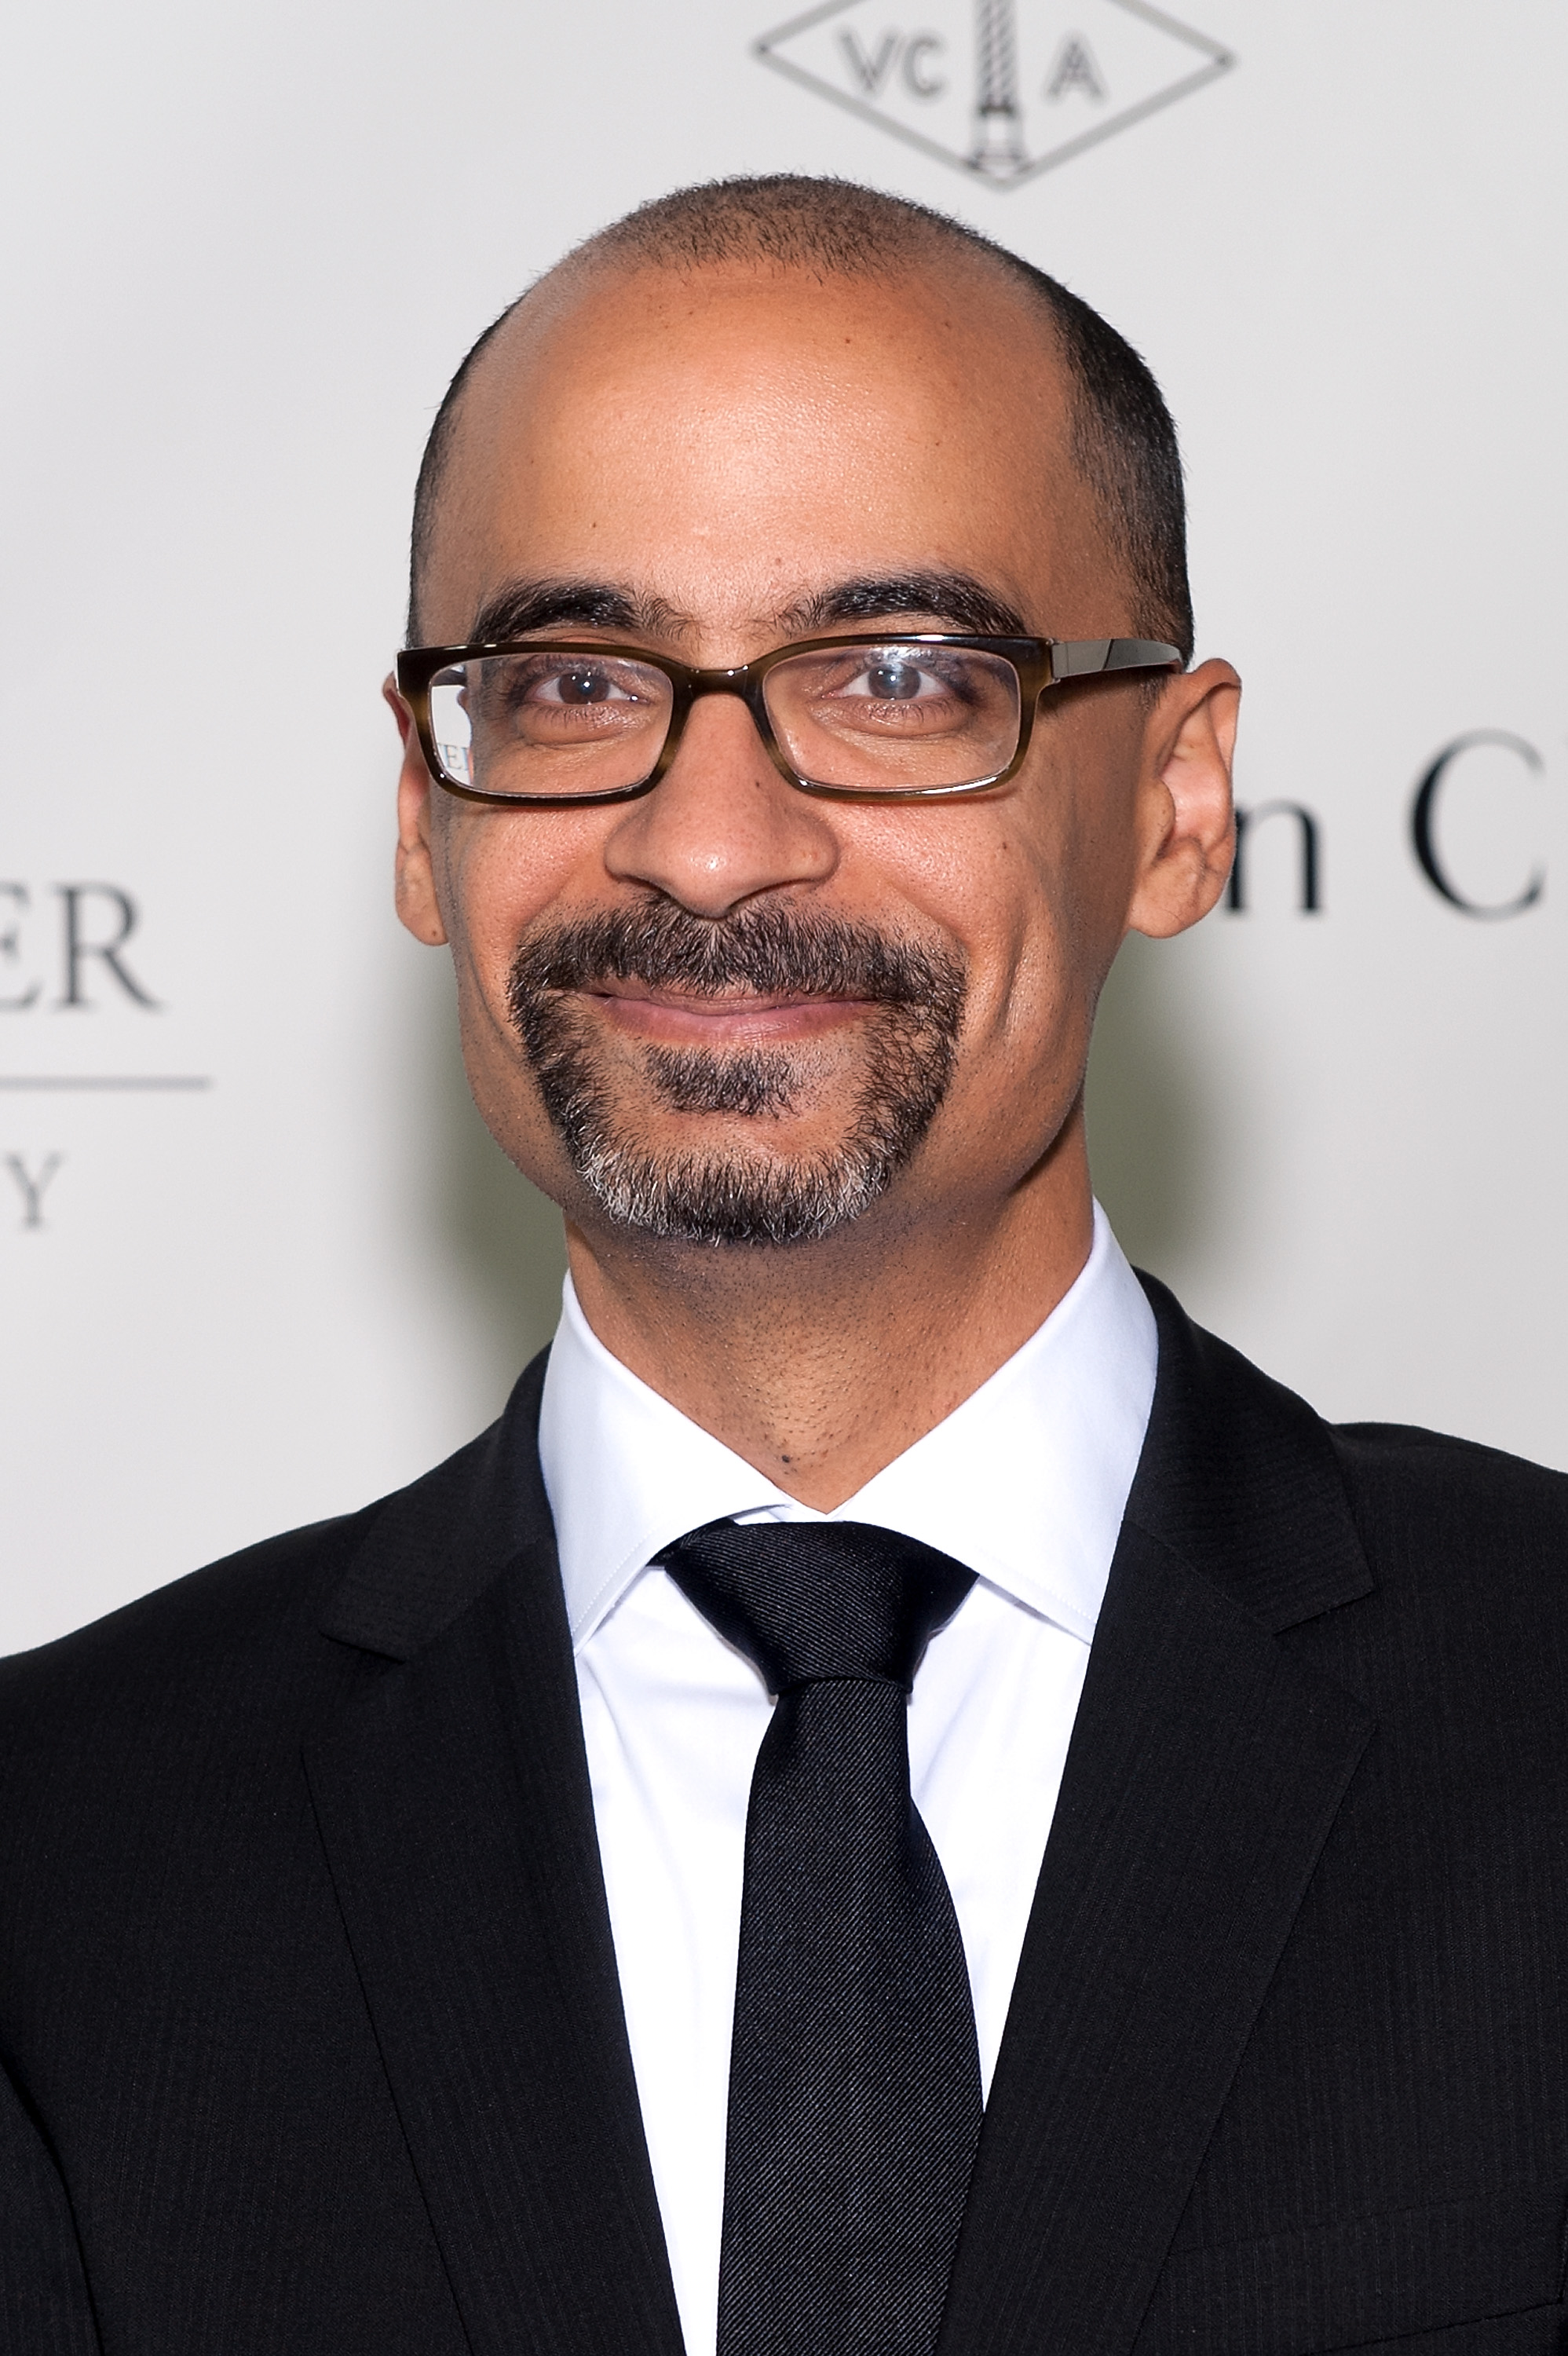 Junot Diaz attends the 2013 Norman Mailer Center gala at the New York Public Library on October 17, 2013 in New York City. (D Dipasupil—FilmMagic/Getty Images)